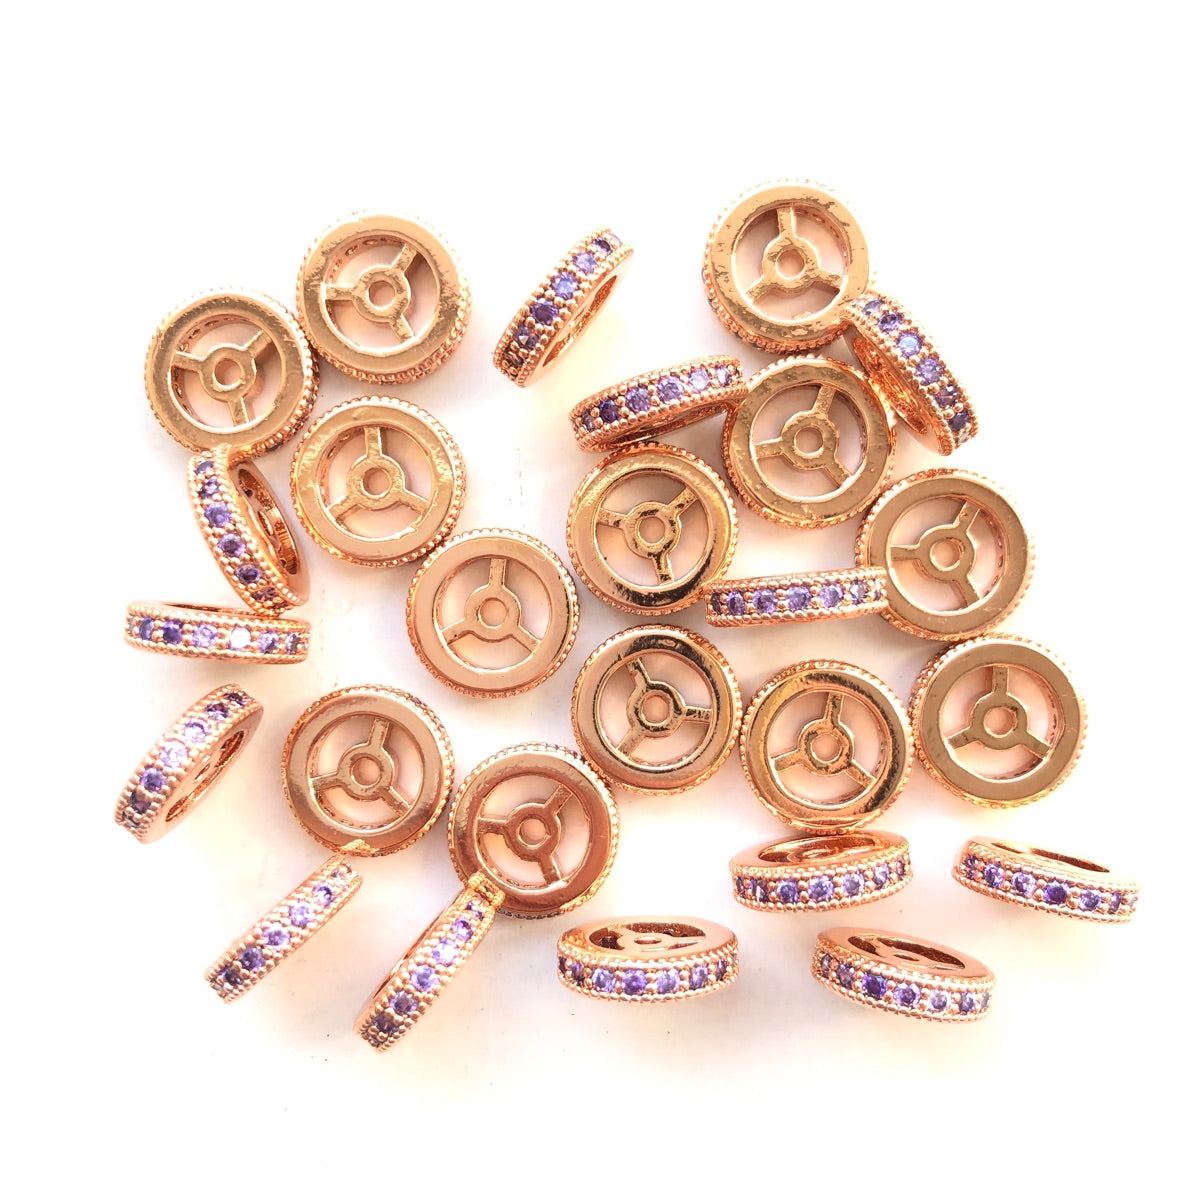 20pcs/lot 9.6/12mm Purple CZ Paved Wheel Rondelle Spacers Rose Gold CZ Paved Spacers New Spacers Arrivals Rondelle Beads Charms Beads Beyond